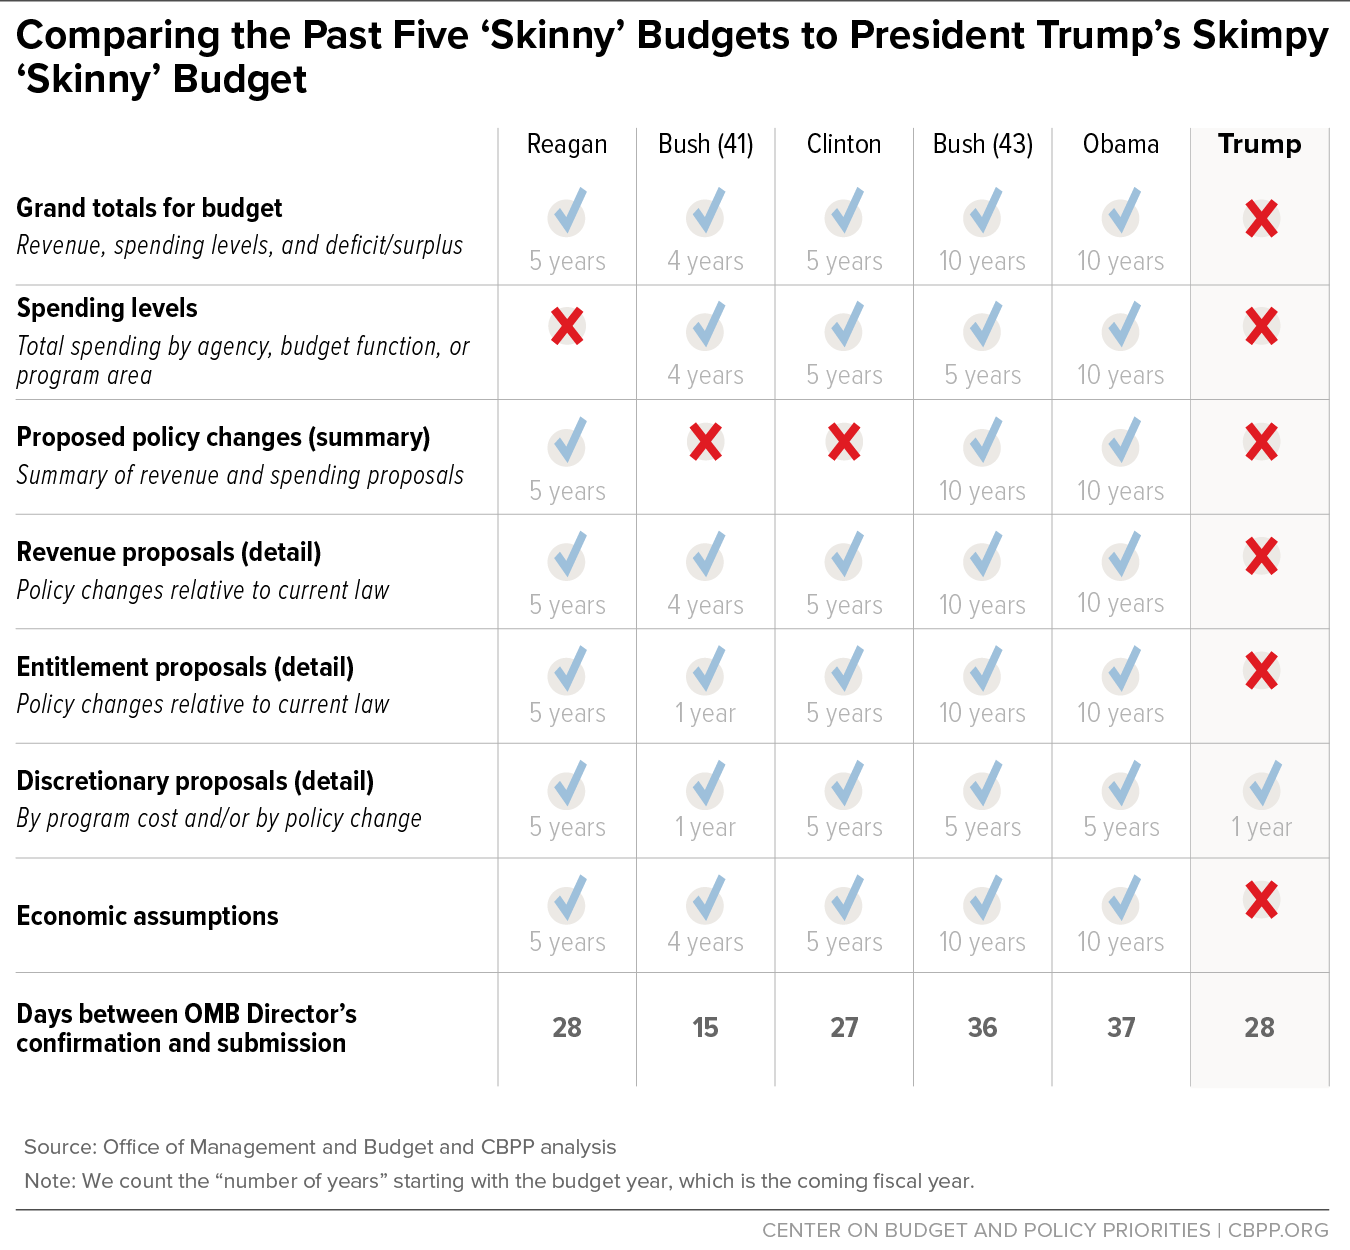 Comparing the Past Five 'Skinny' Budgets to President Trump's Skimpy Skinny Budget